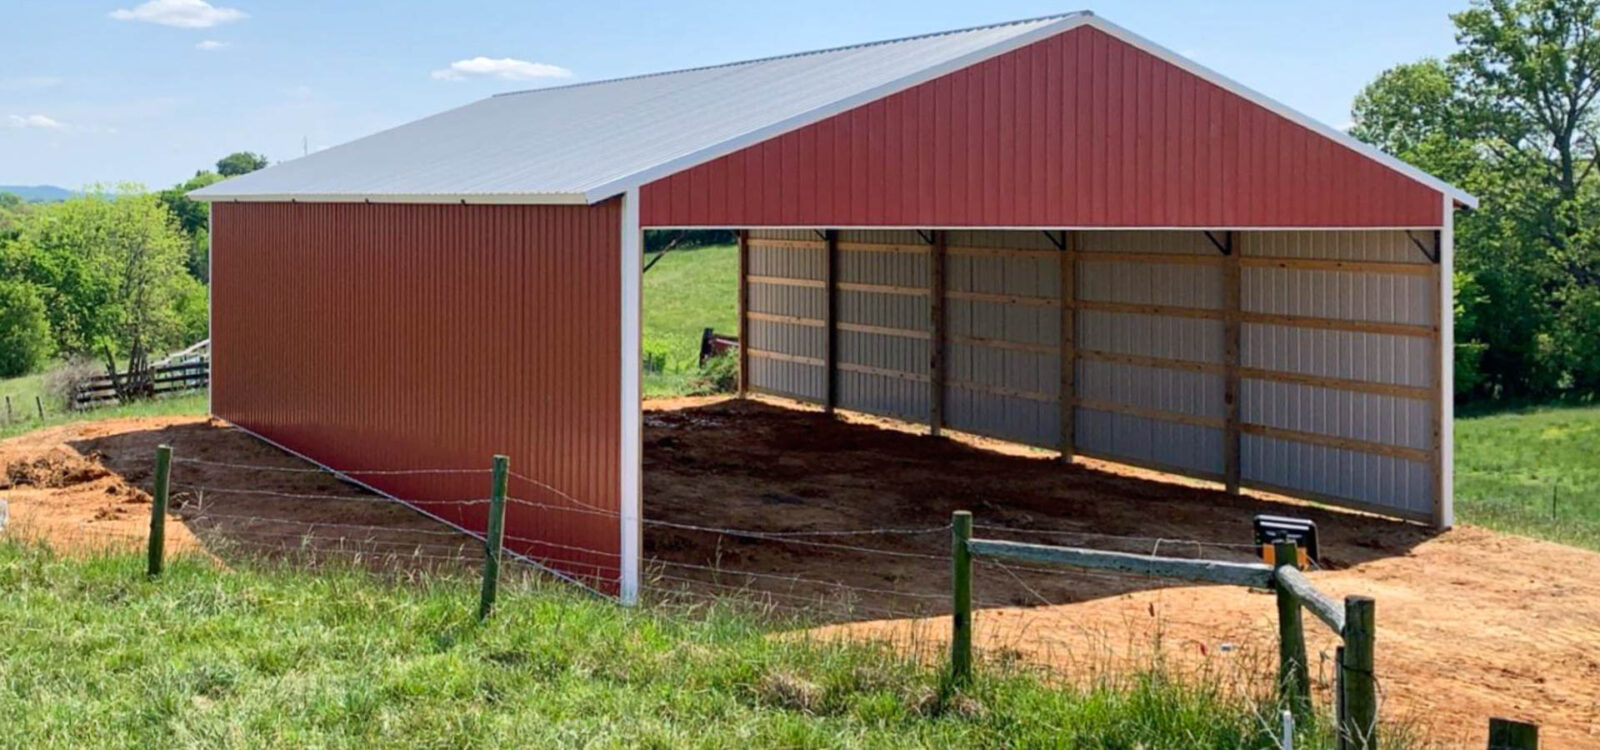 Commercial Pole Barns In TN & KY